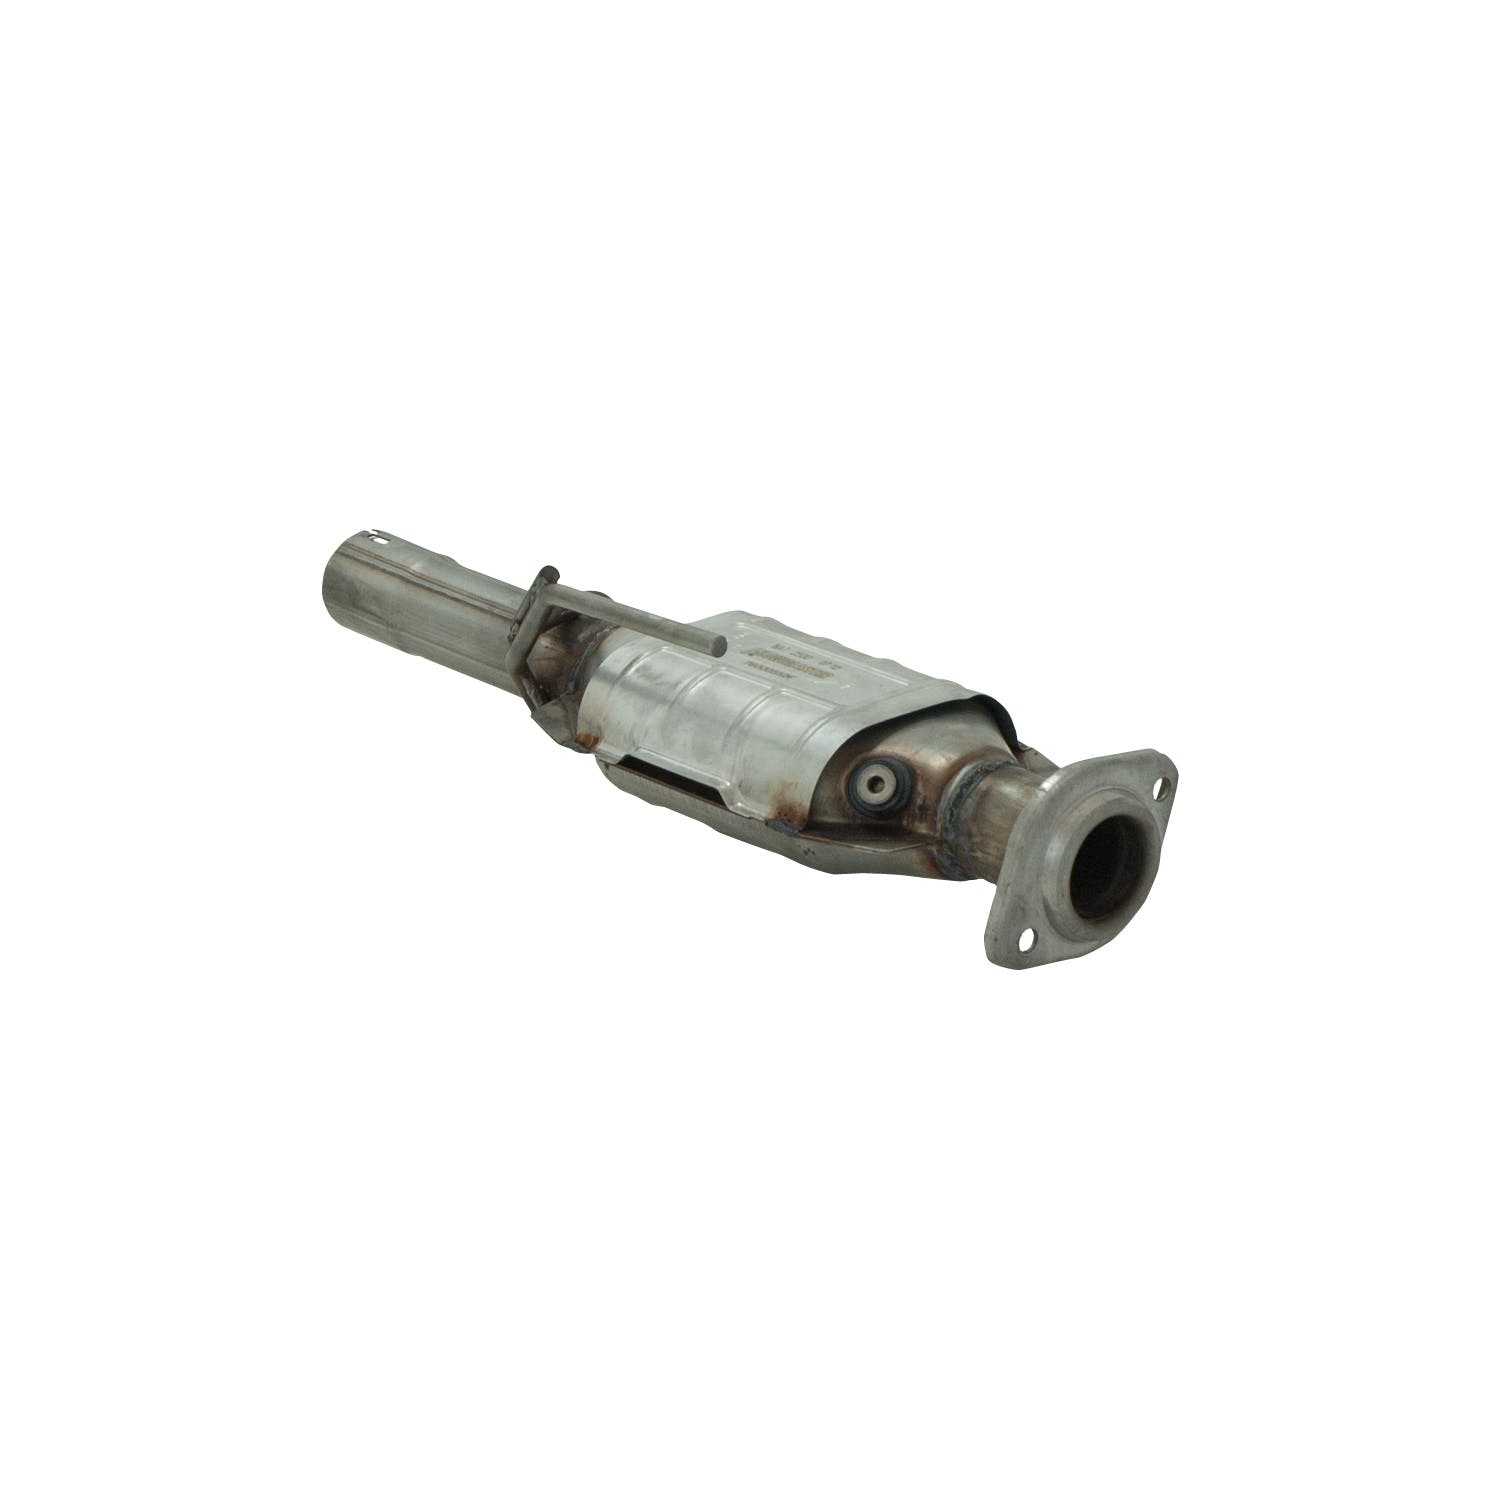 Flowmaster Catalytic Converters 2040004 Catalytic Converter-Direct Fit-2.50 in Inlet 2.25 in Outlet-49 State